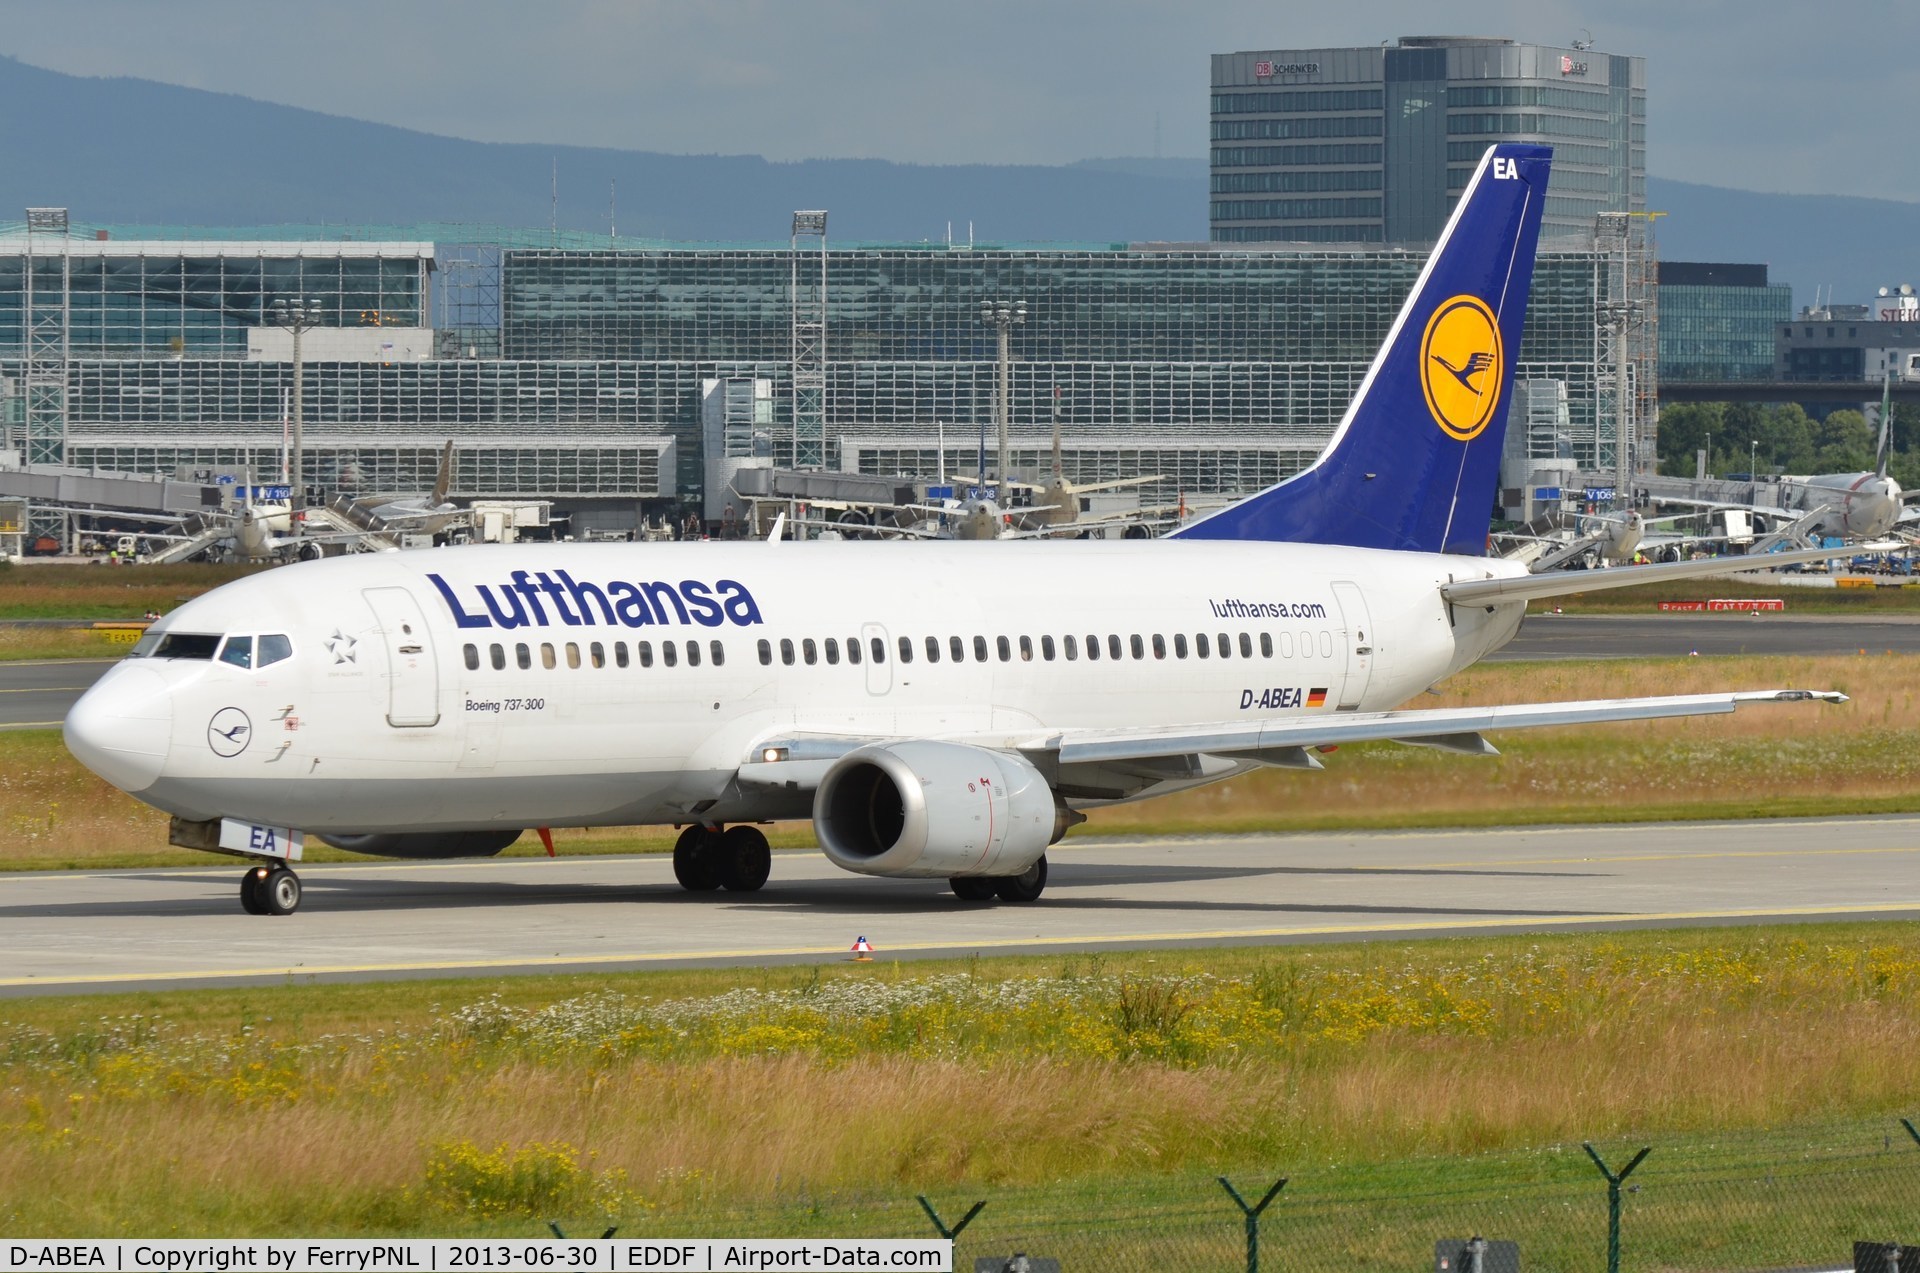 D-ABEA, 1990 Boeing 737-330 C/N 24565, Lufthansa B733 taxying out